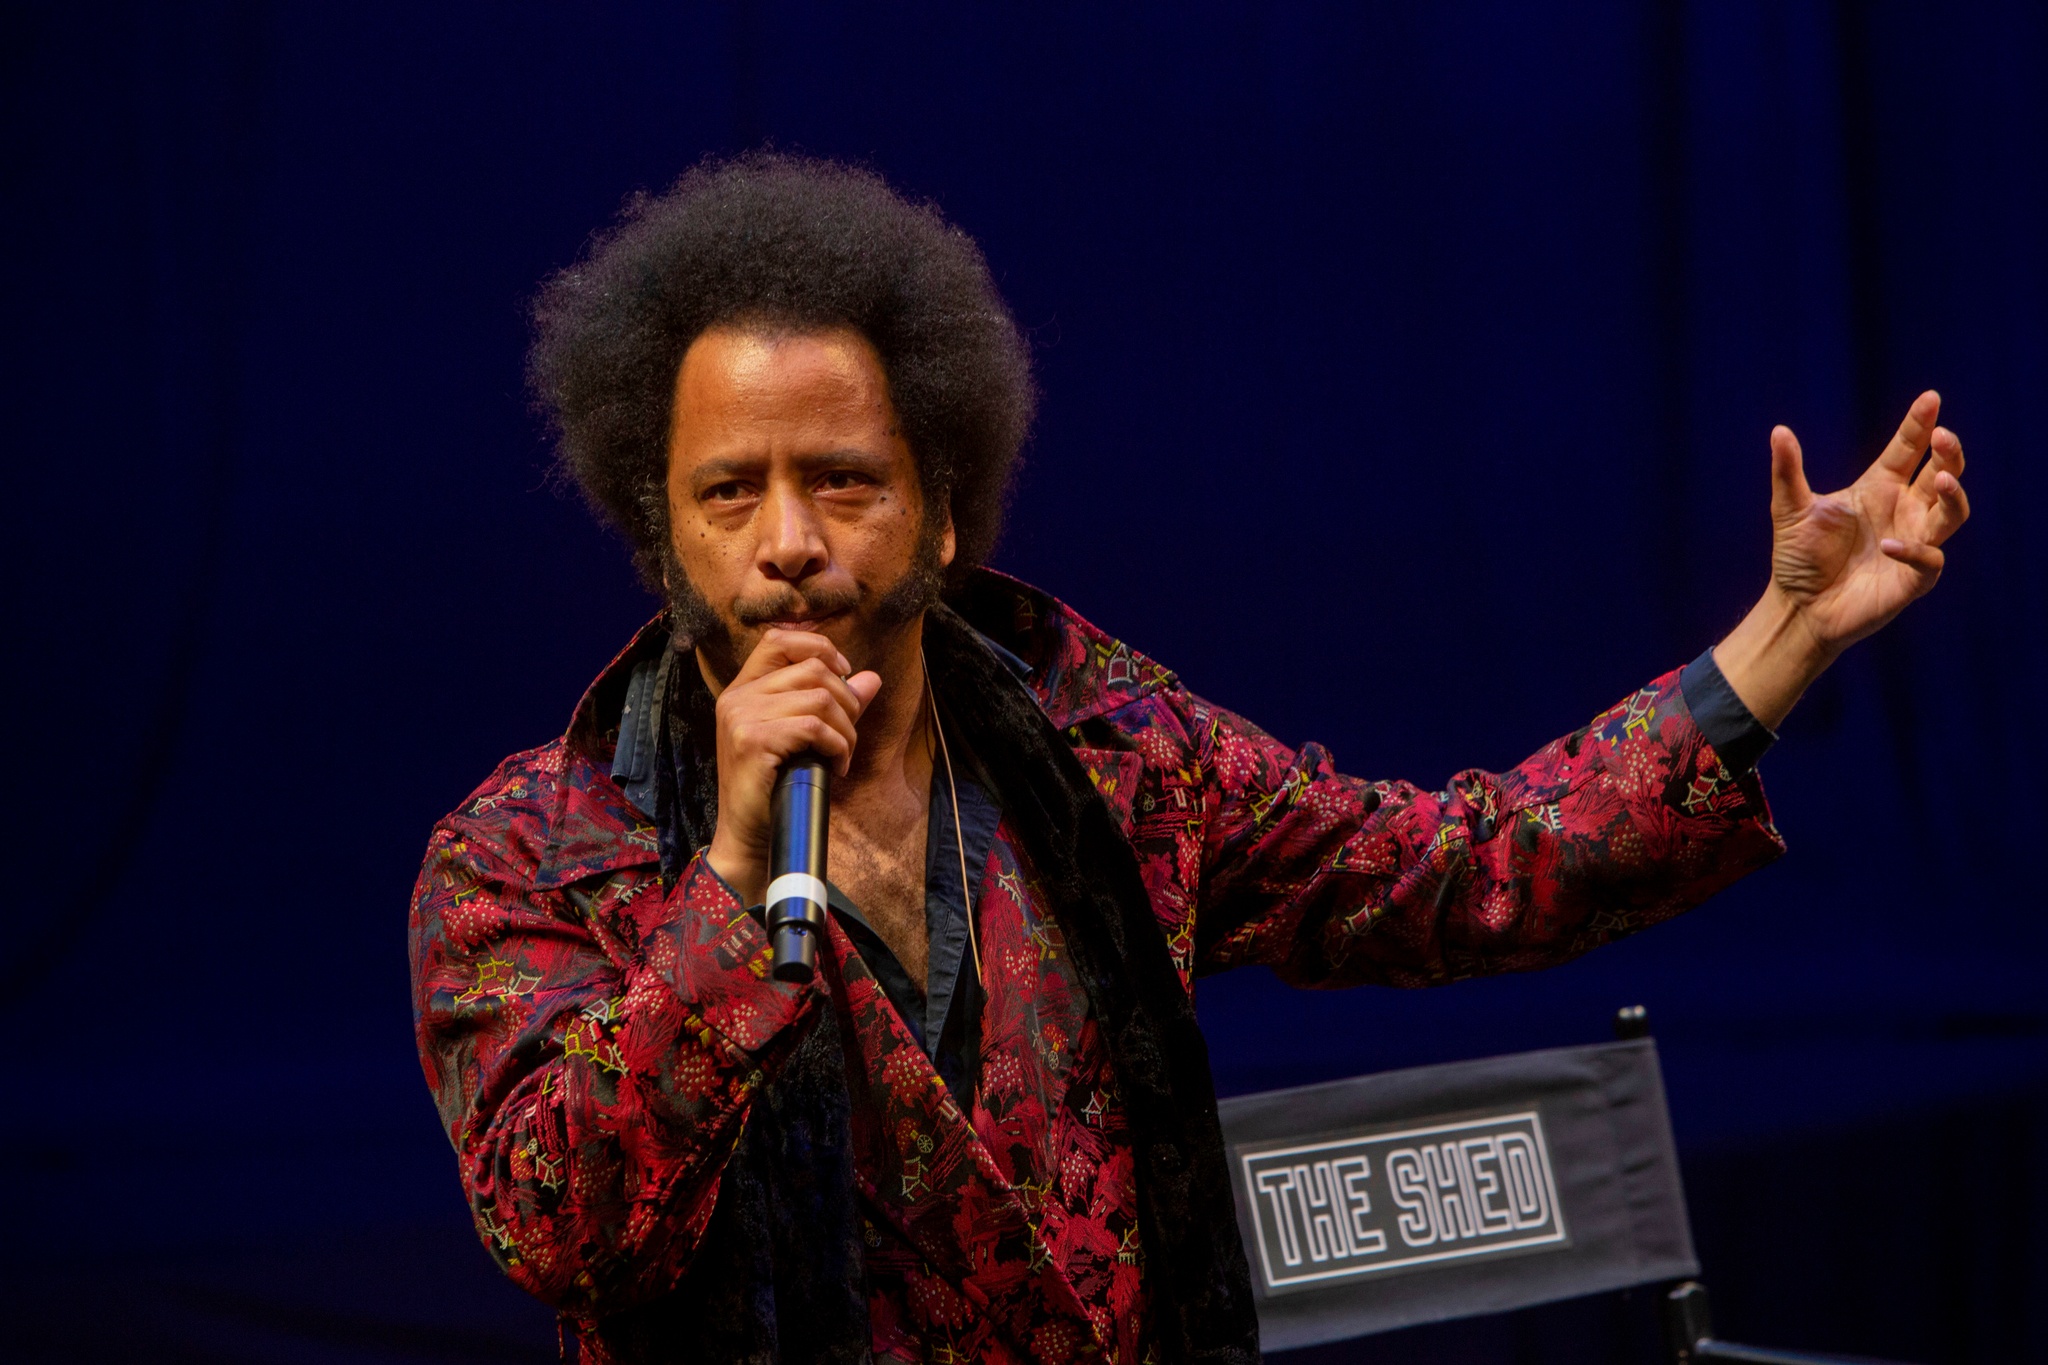 A photo of Boots Riley during his lecture at The Shed